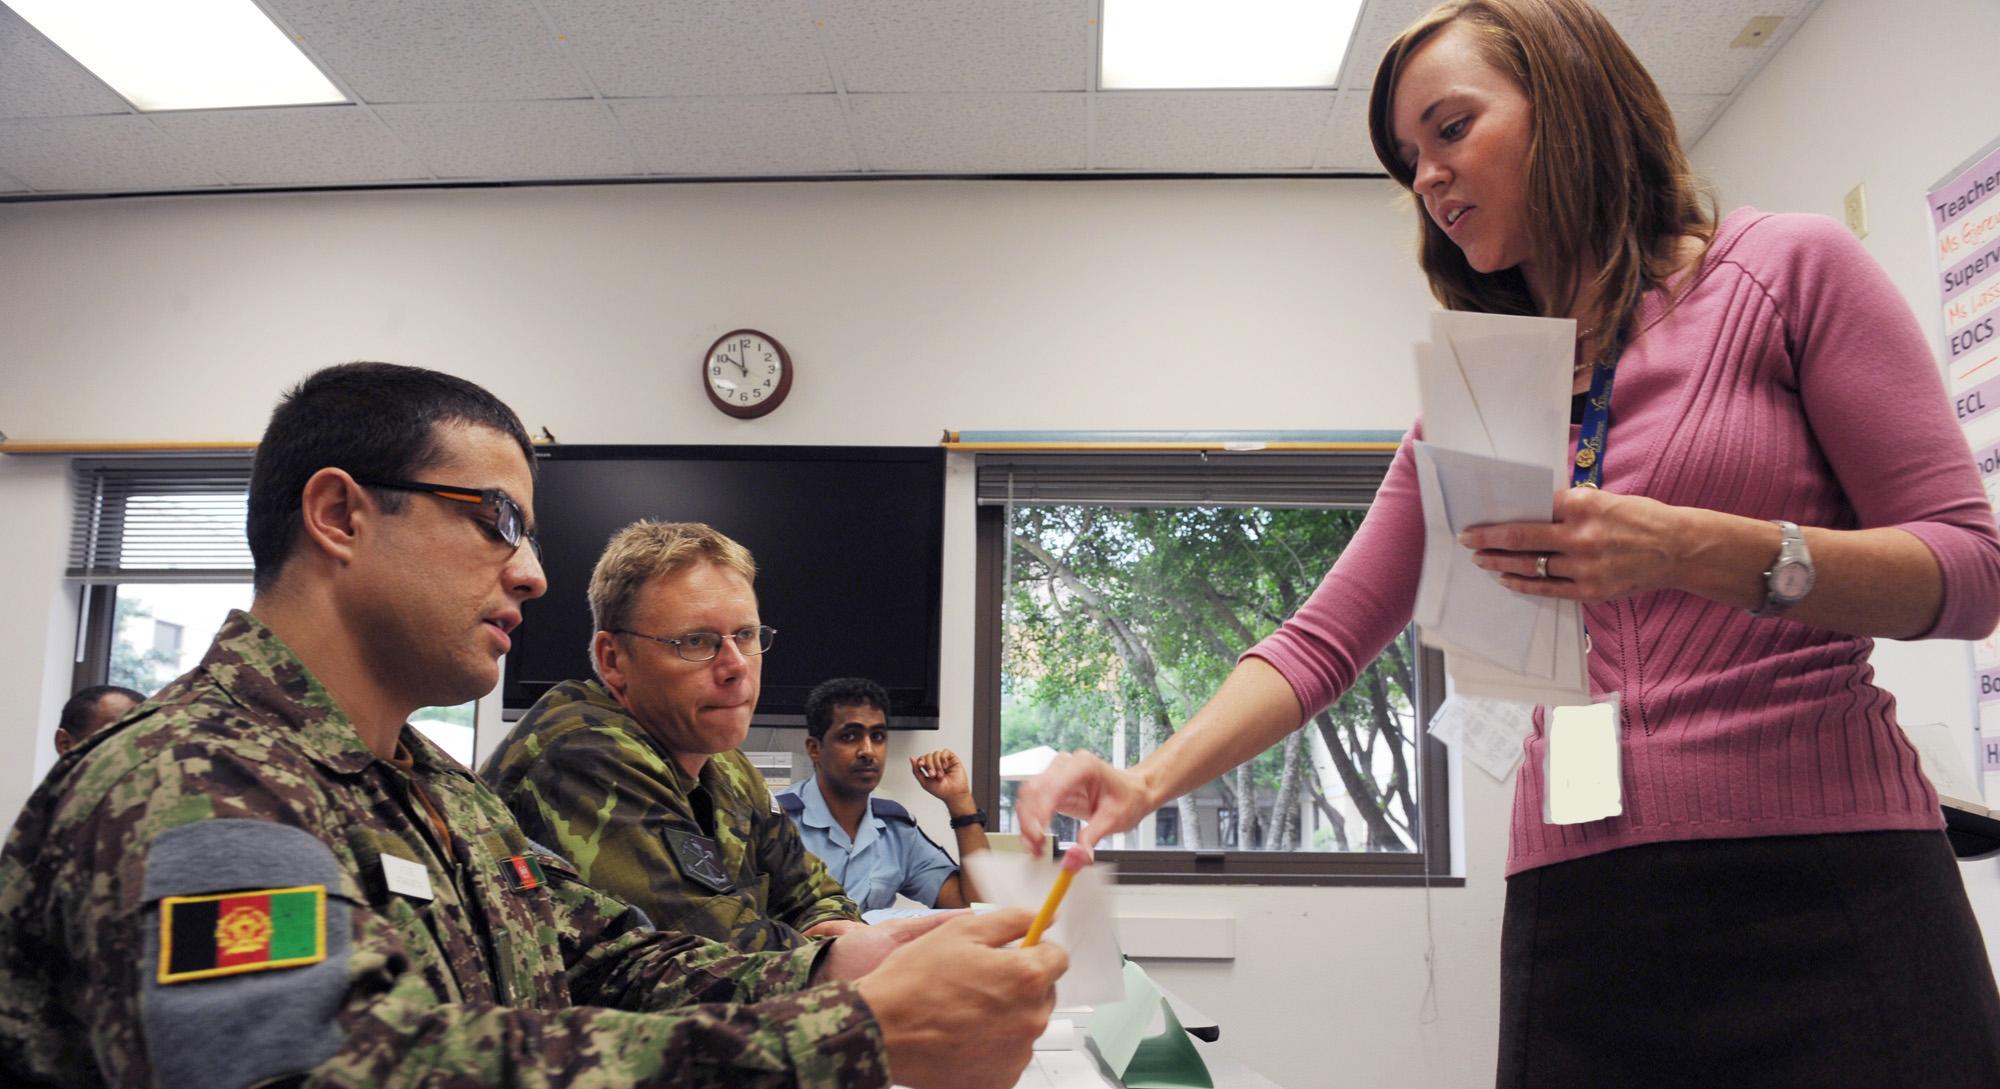 instructor hands two military students an assignment